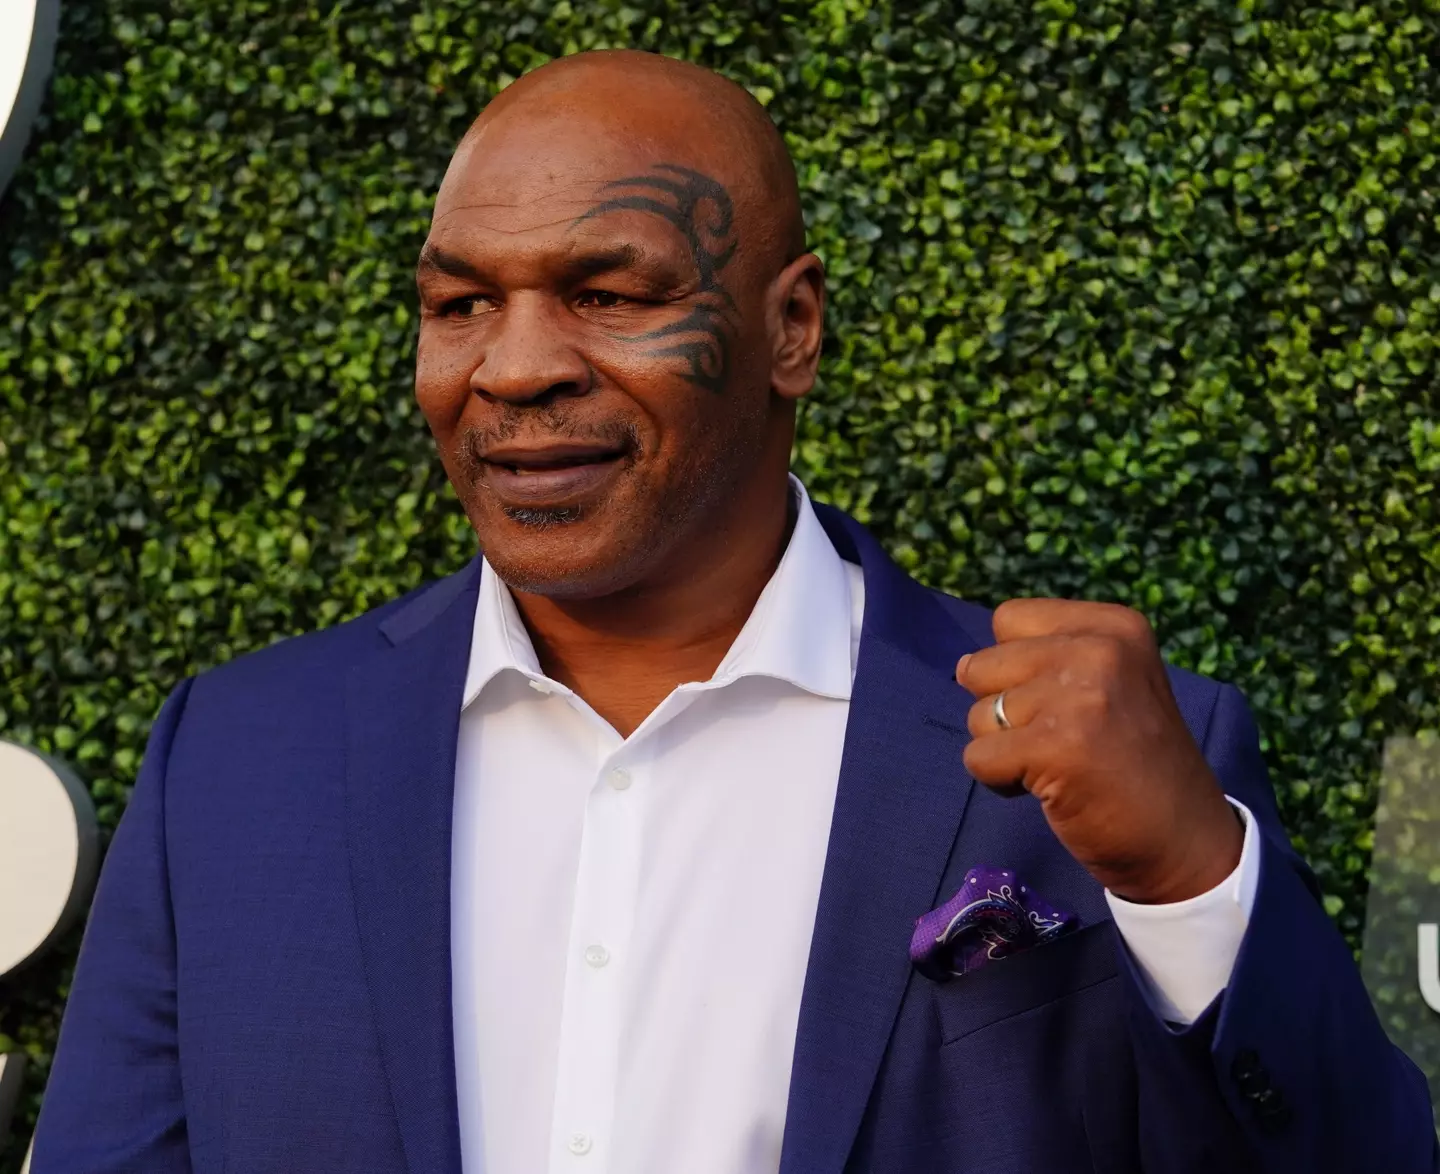 Mike Tyson spent three years behind bars in the 90s.